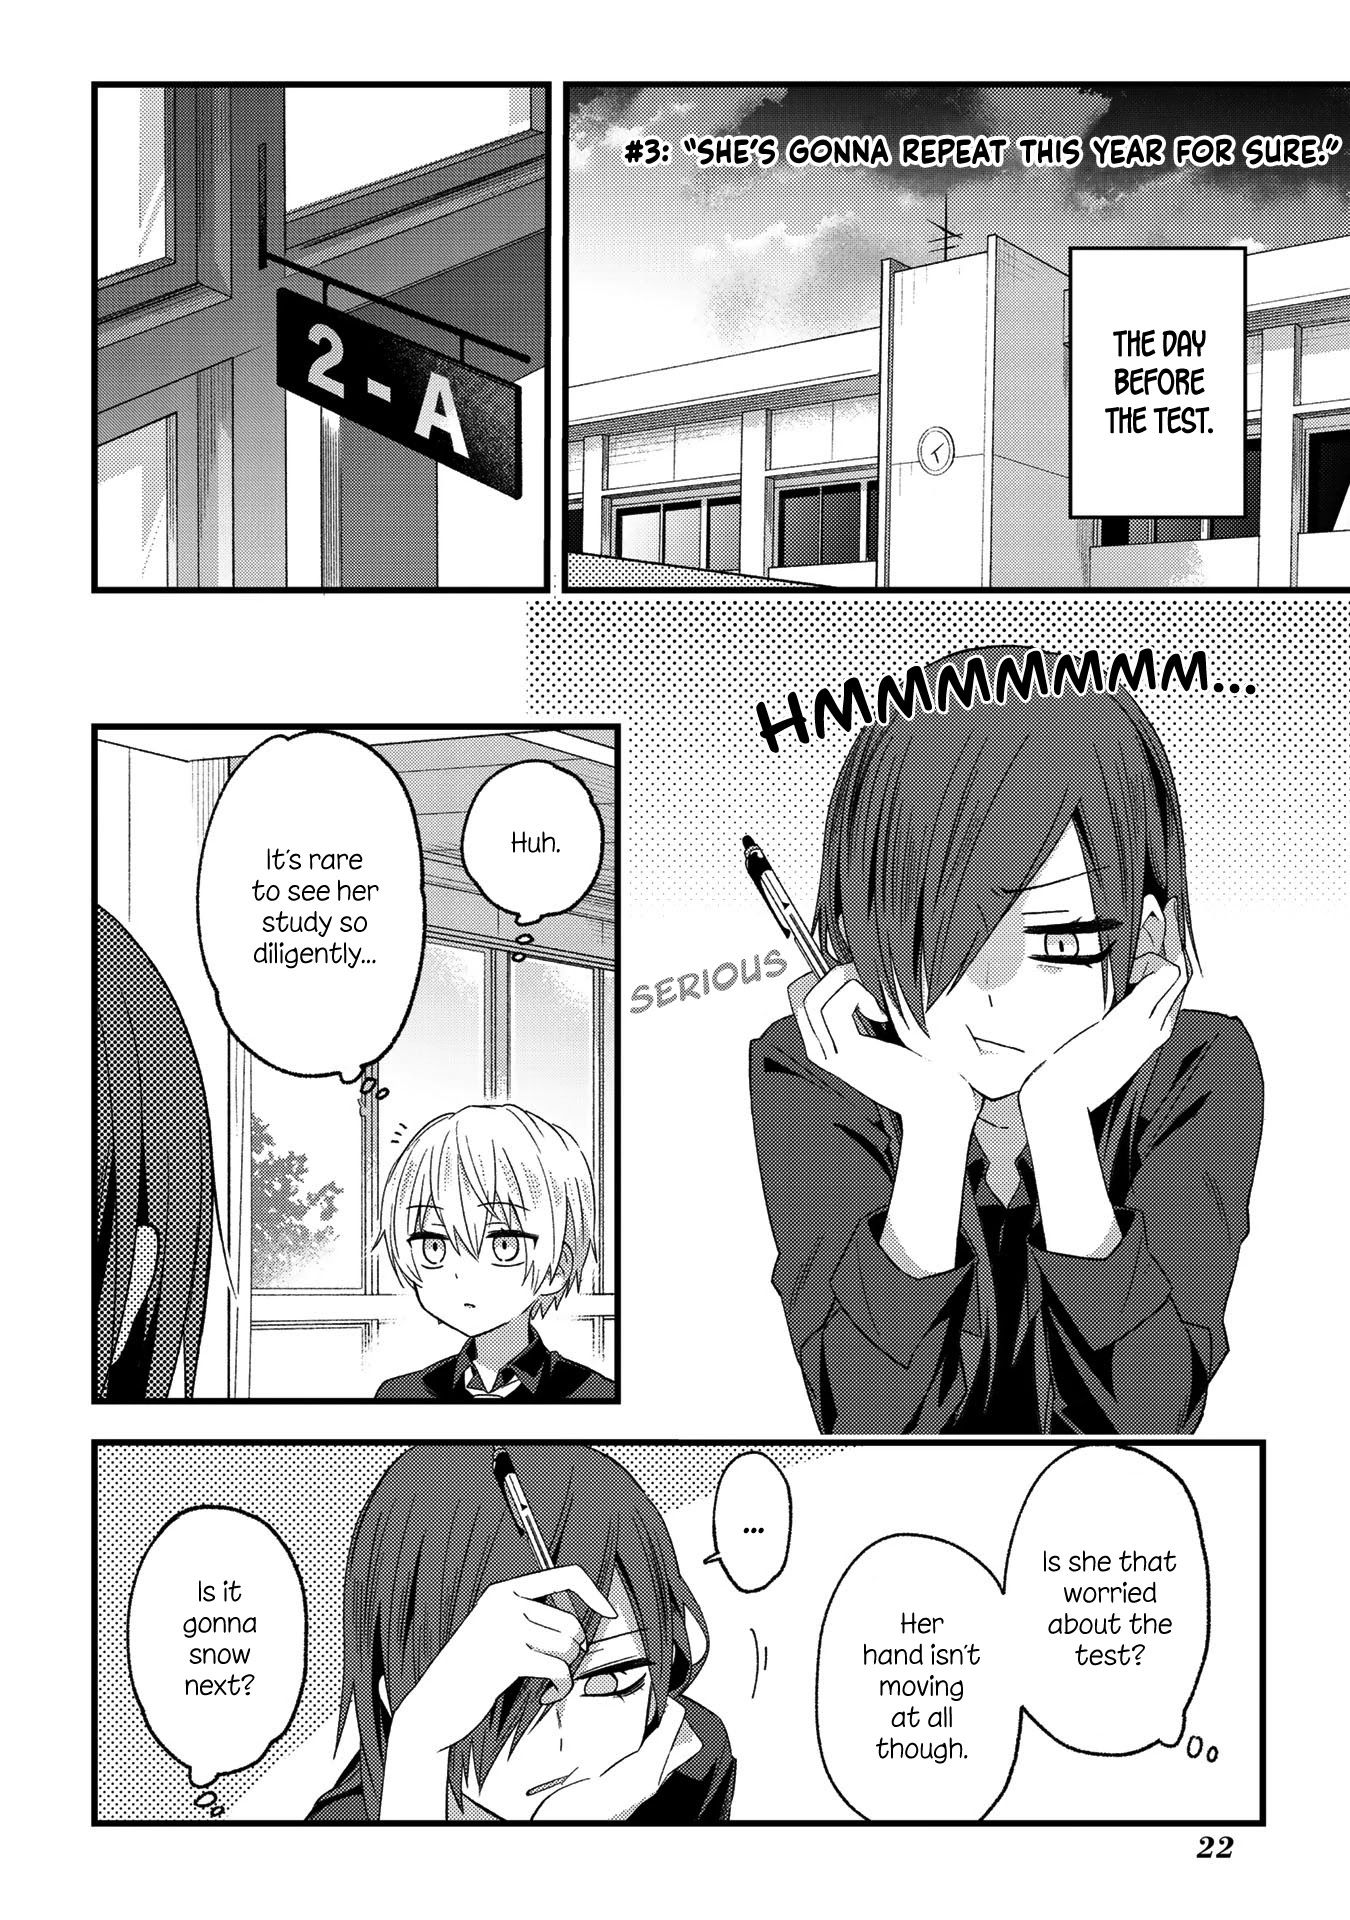 School Zone (Ningiyau) Chapter 3: She's Gonna Repeat This Year For Sure. - Picture 1